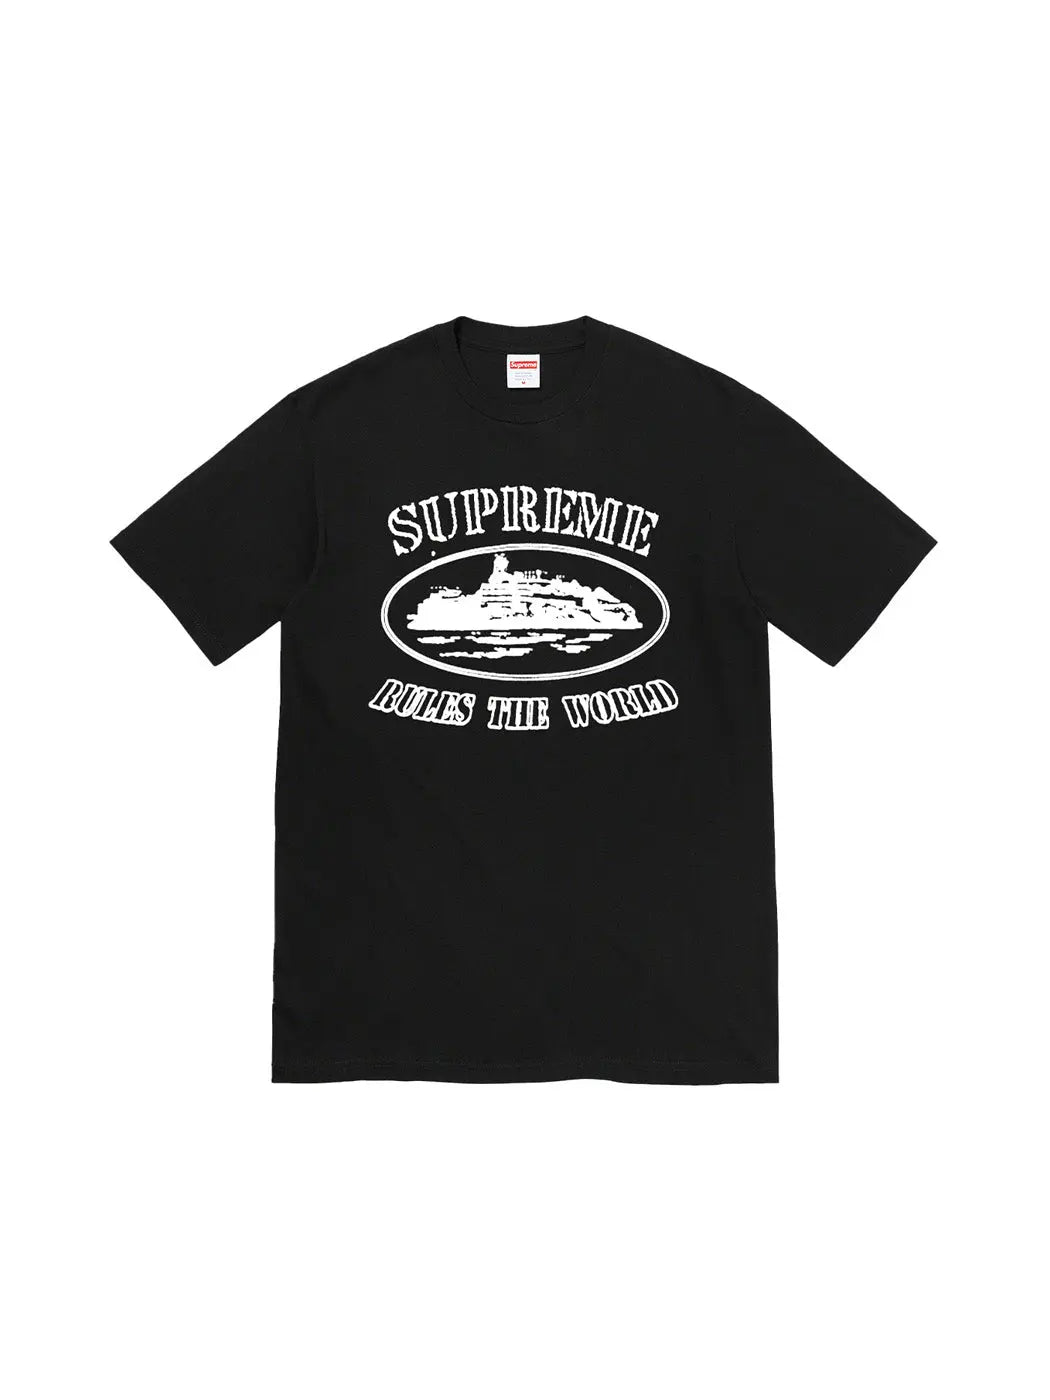 Supreme Corteiz Rules The World Tee Black in Auckland, New Zealand - Shop name